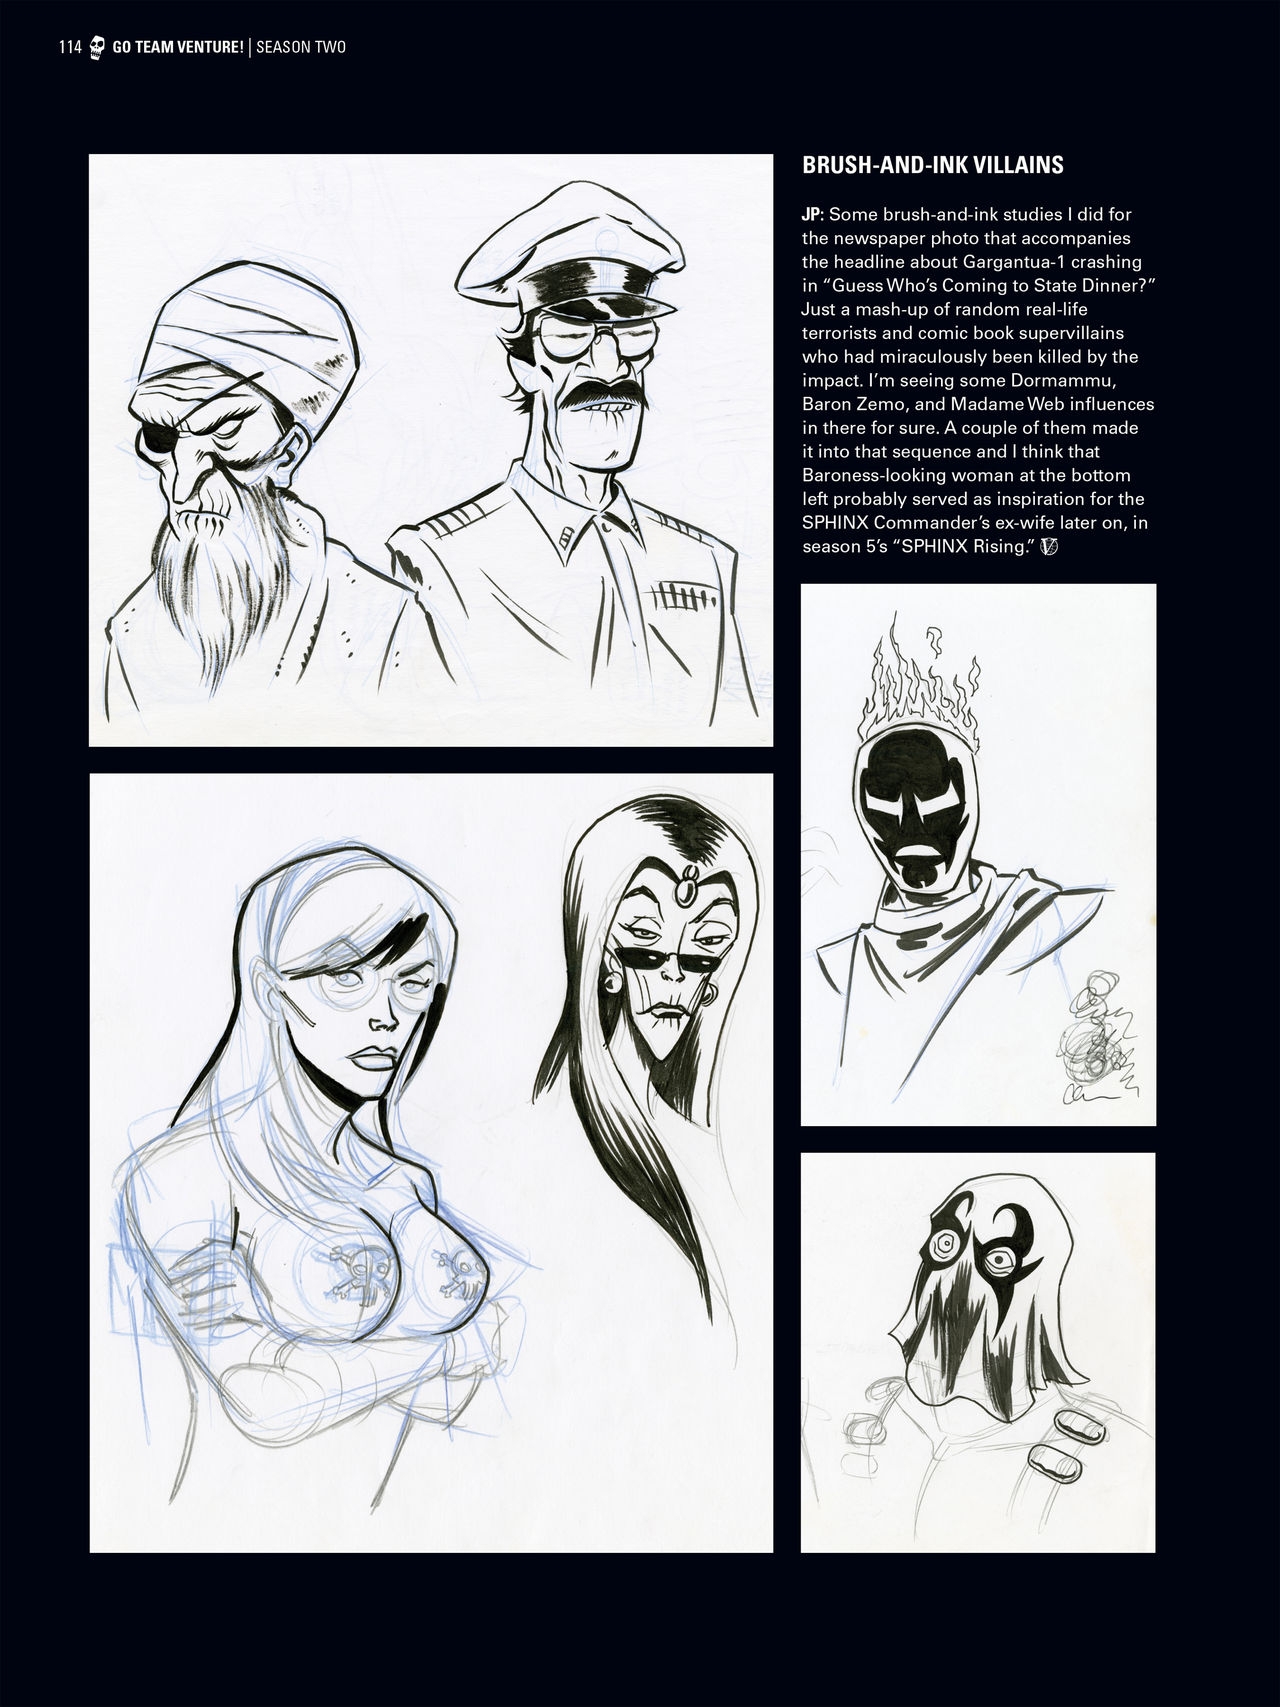 Go Team Venture! - The Art and Making of the Venture Bros 113